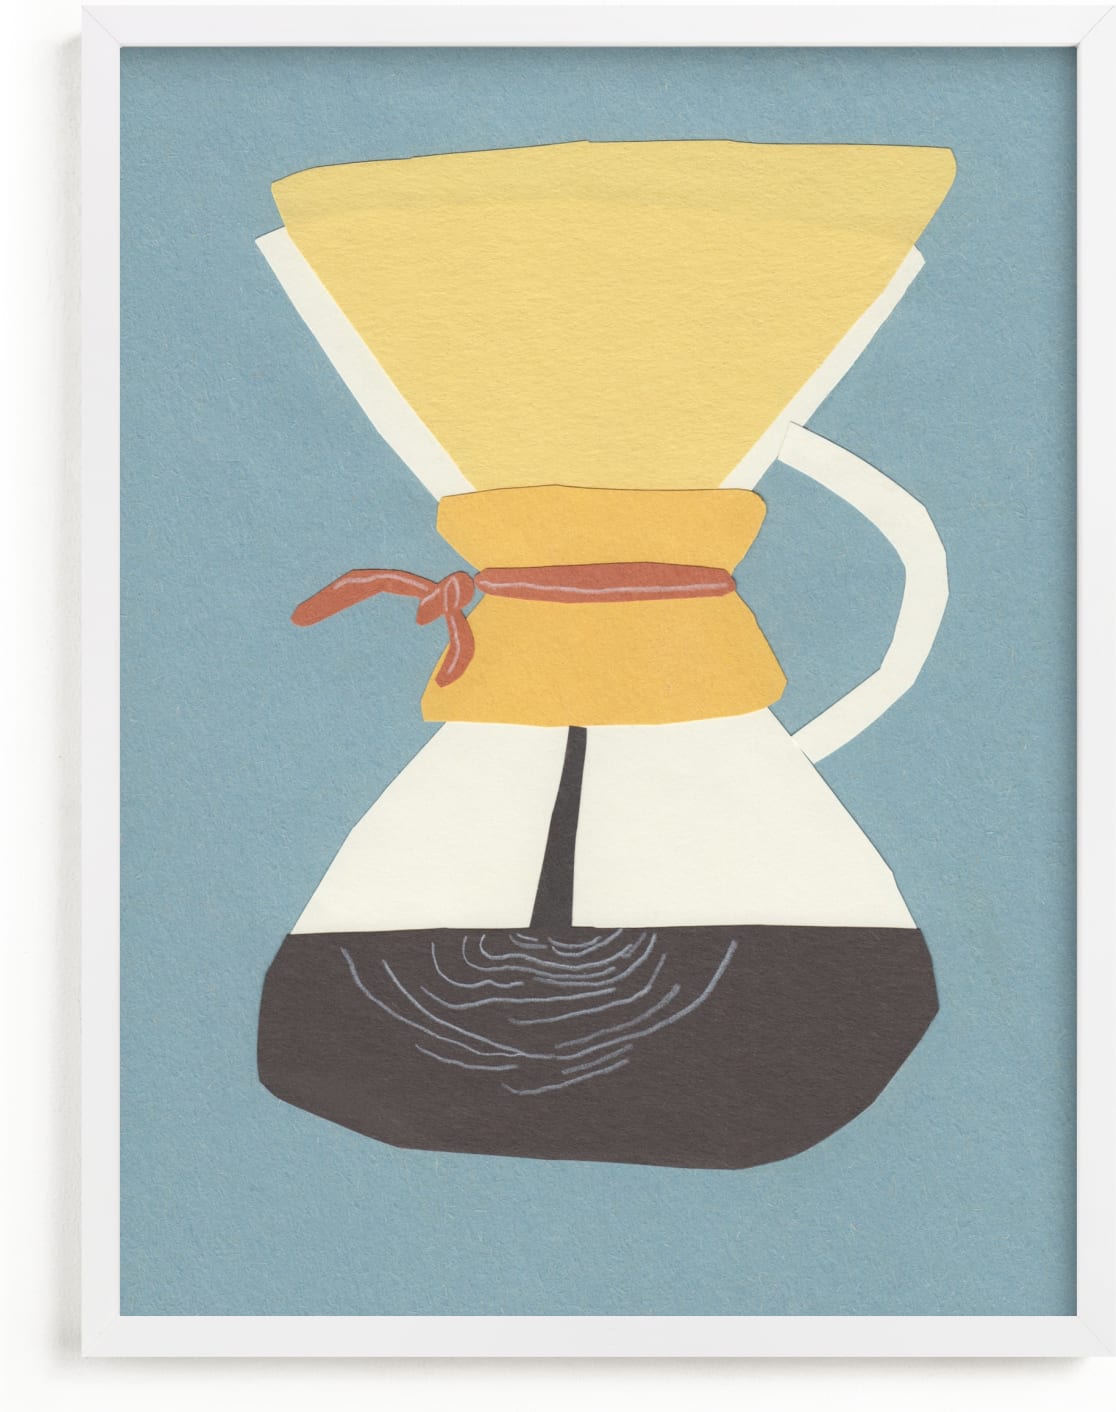 This is a blue art by Elliot Stokes called Coffee Maker.